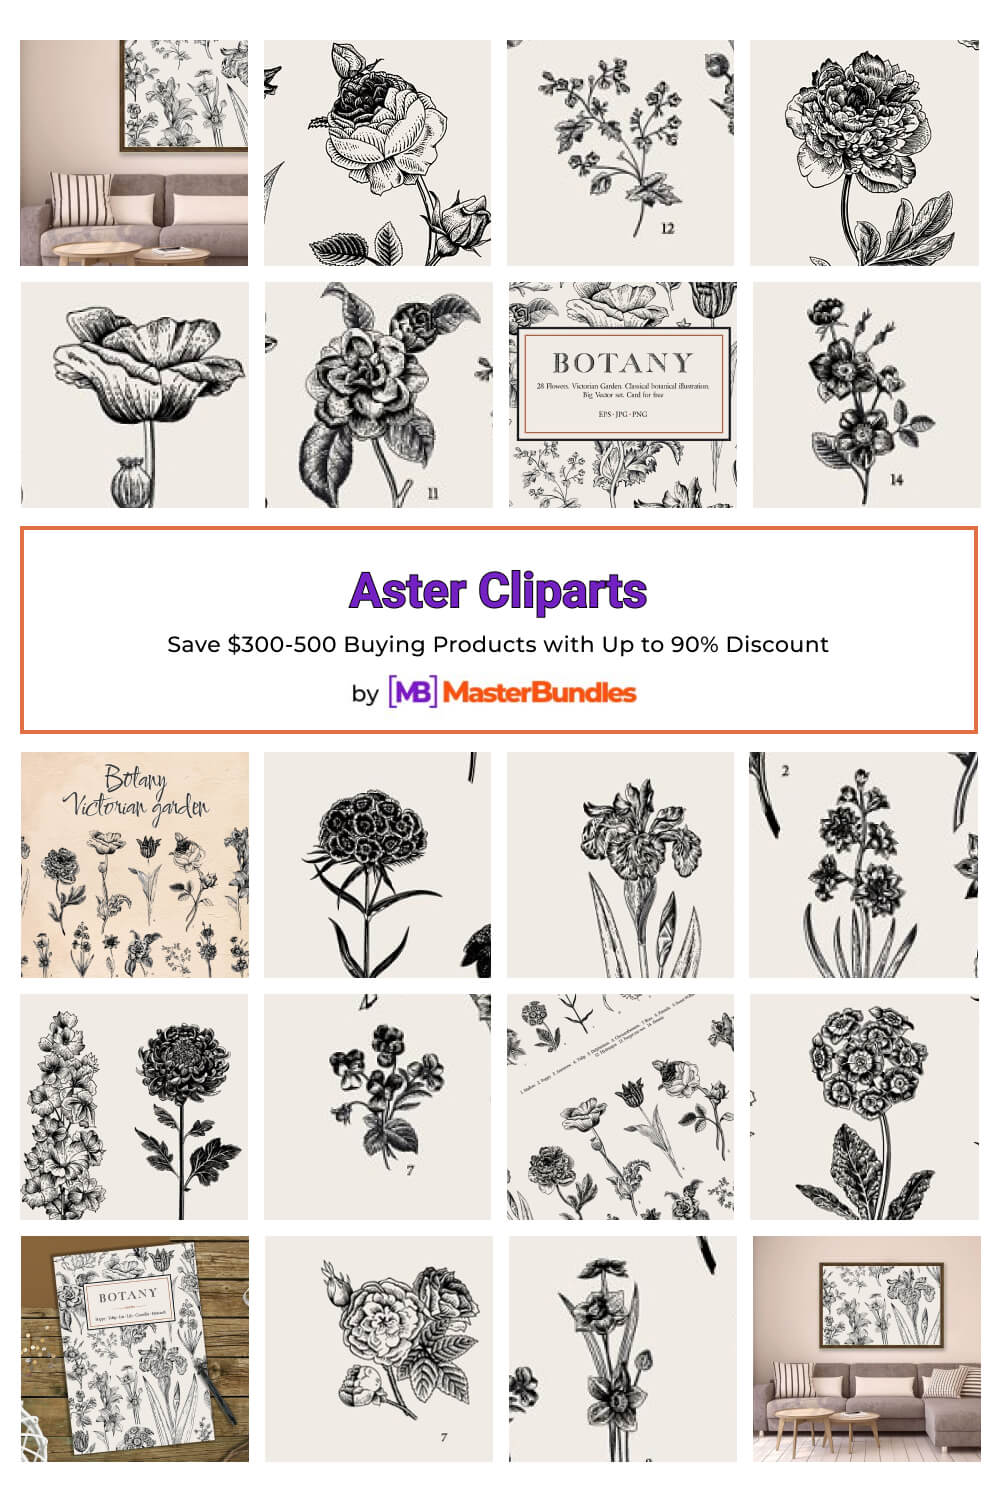 aster cliparts pinterest image.